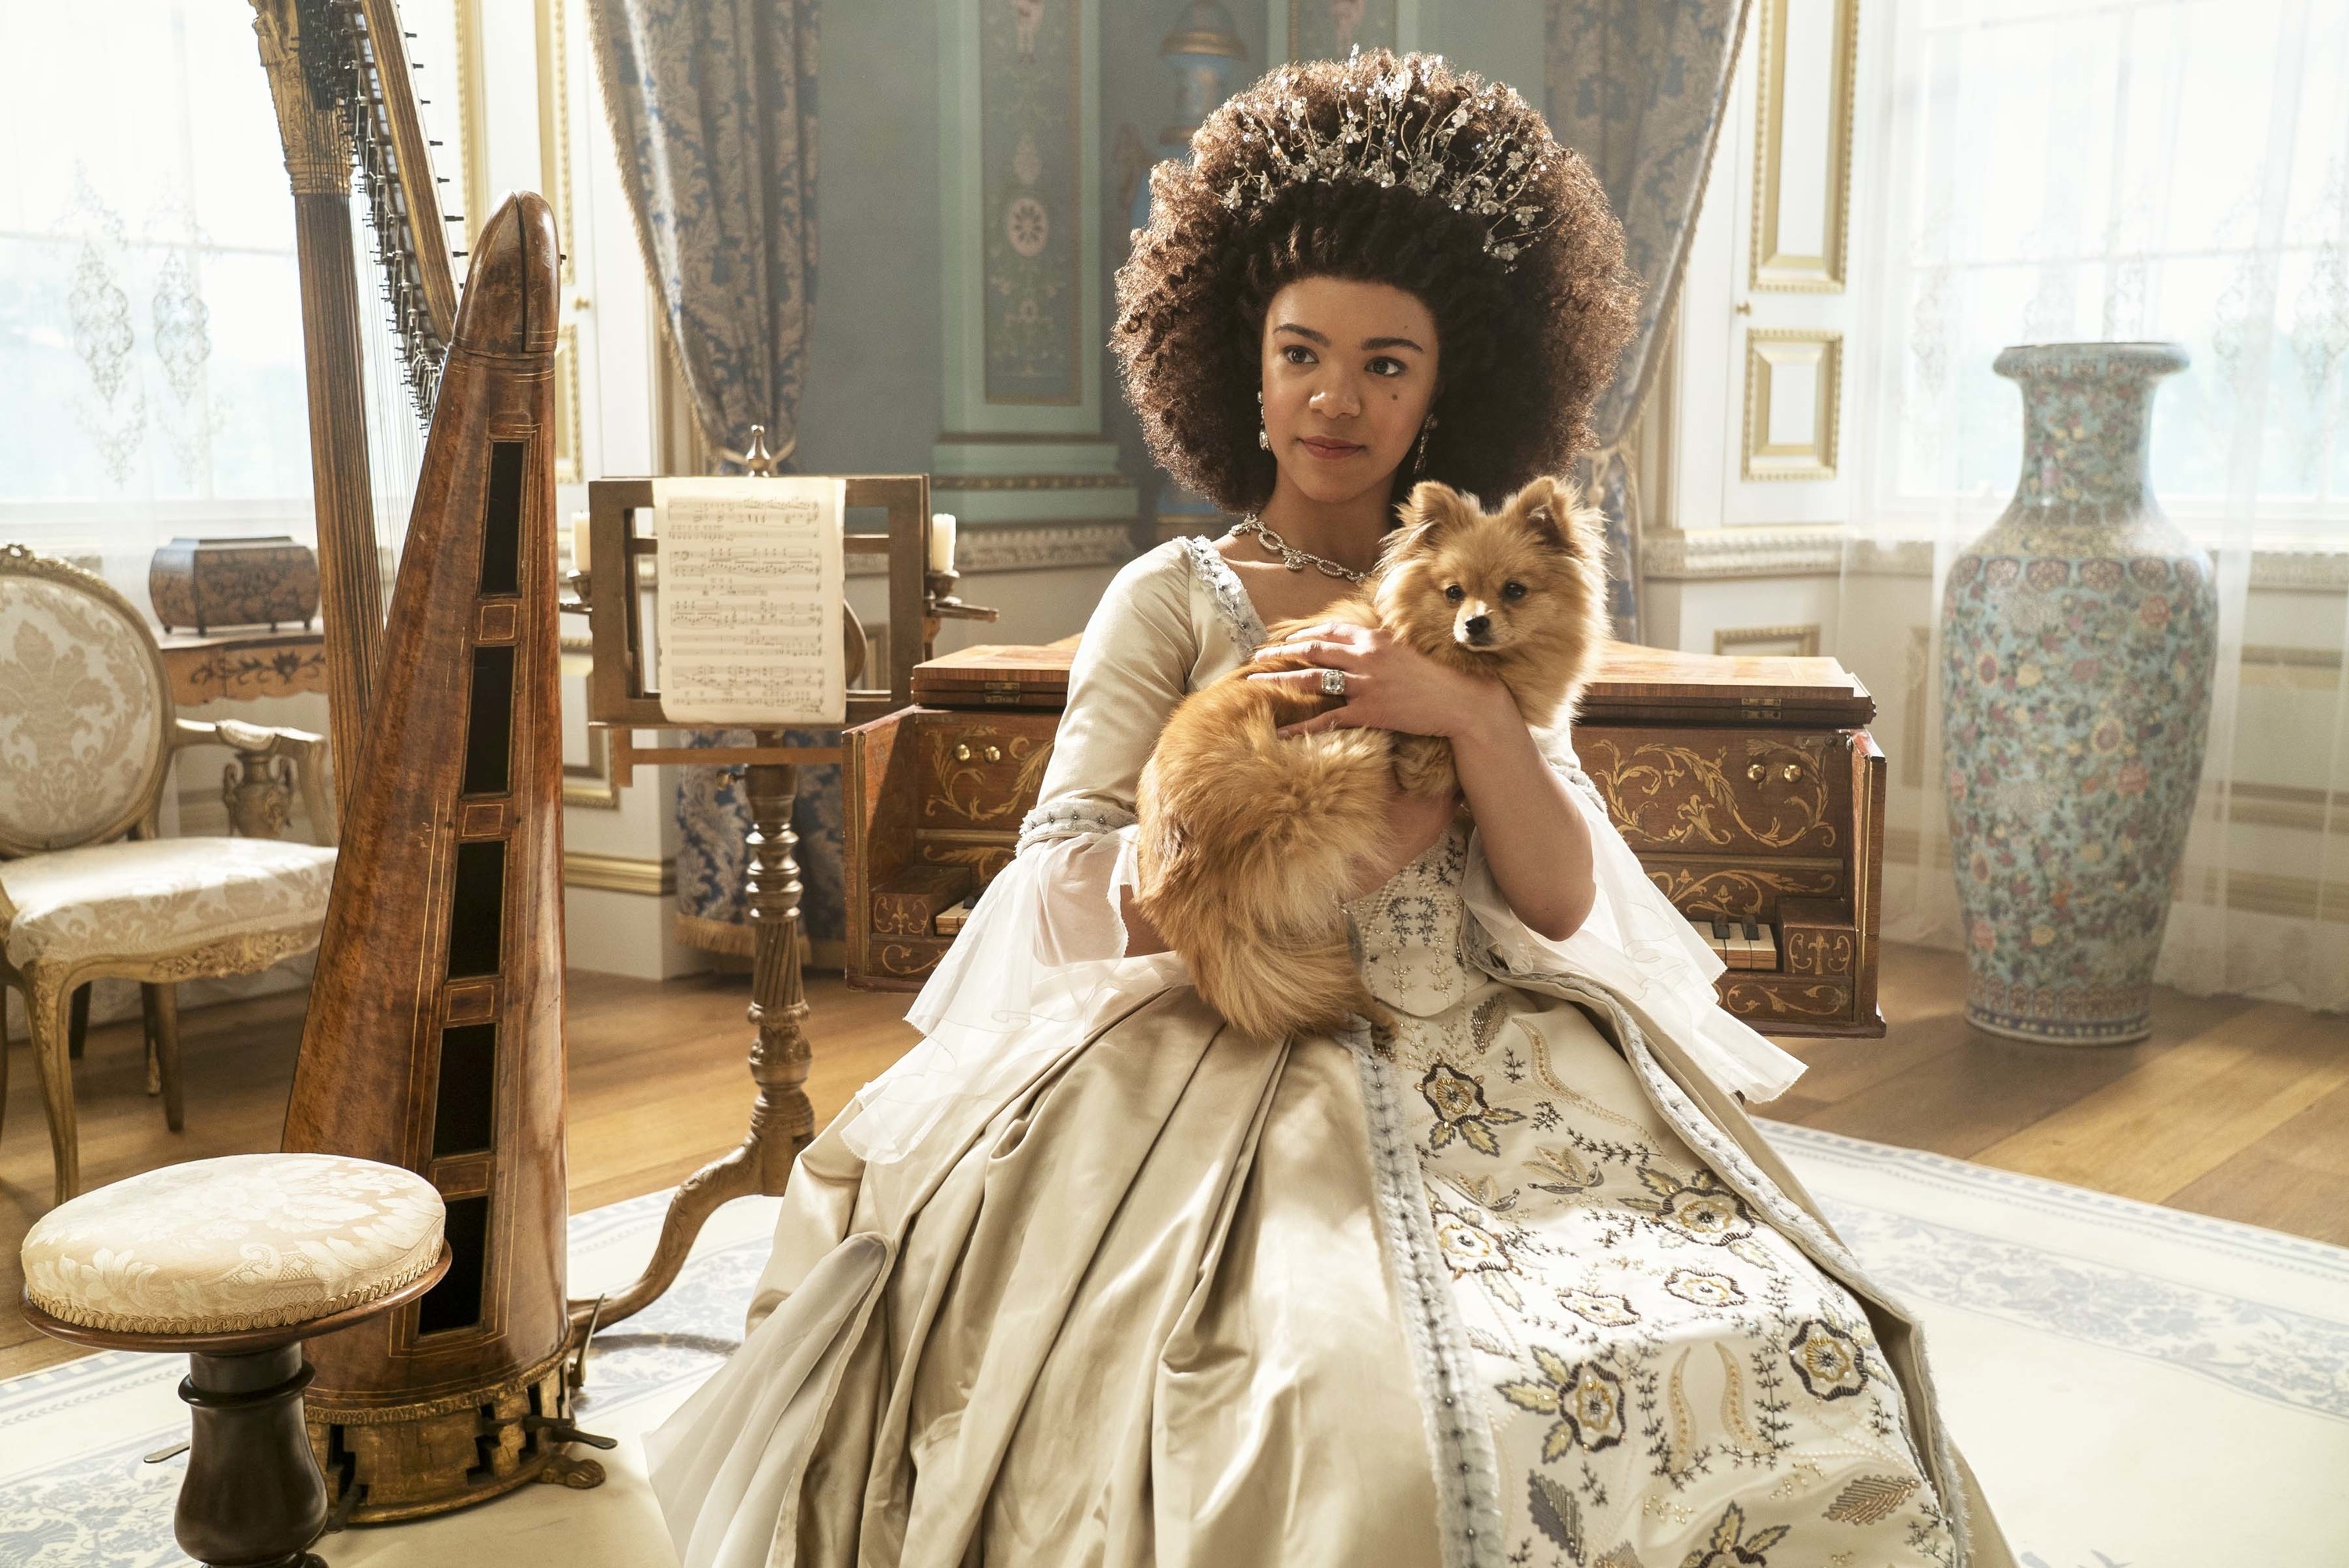 the queen holding a small dog in the show